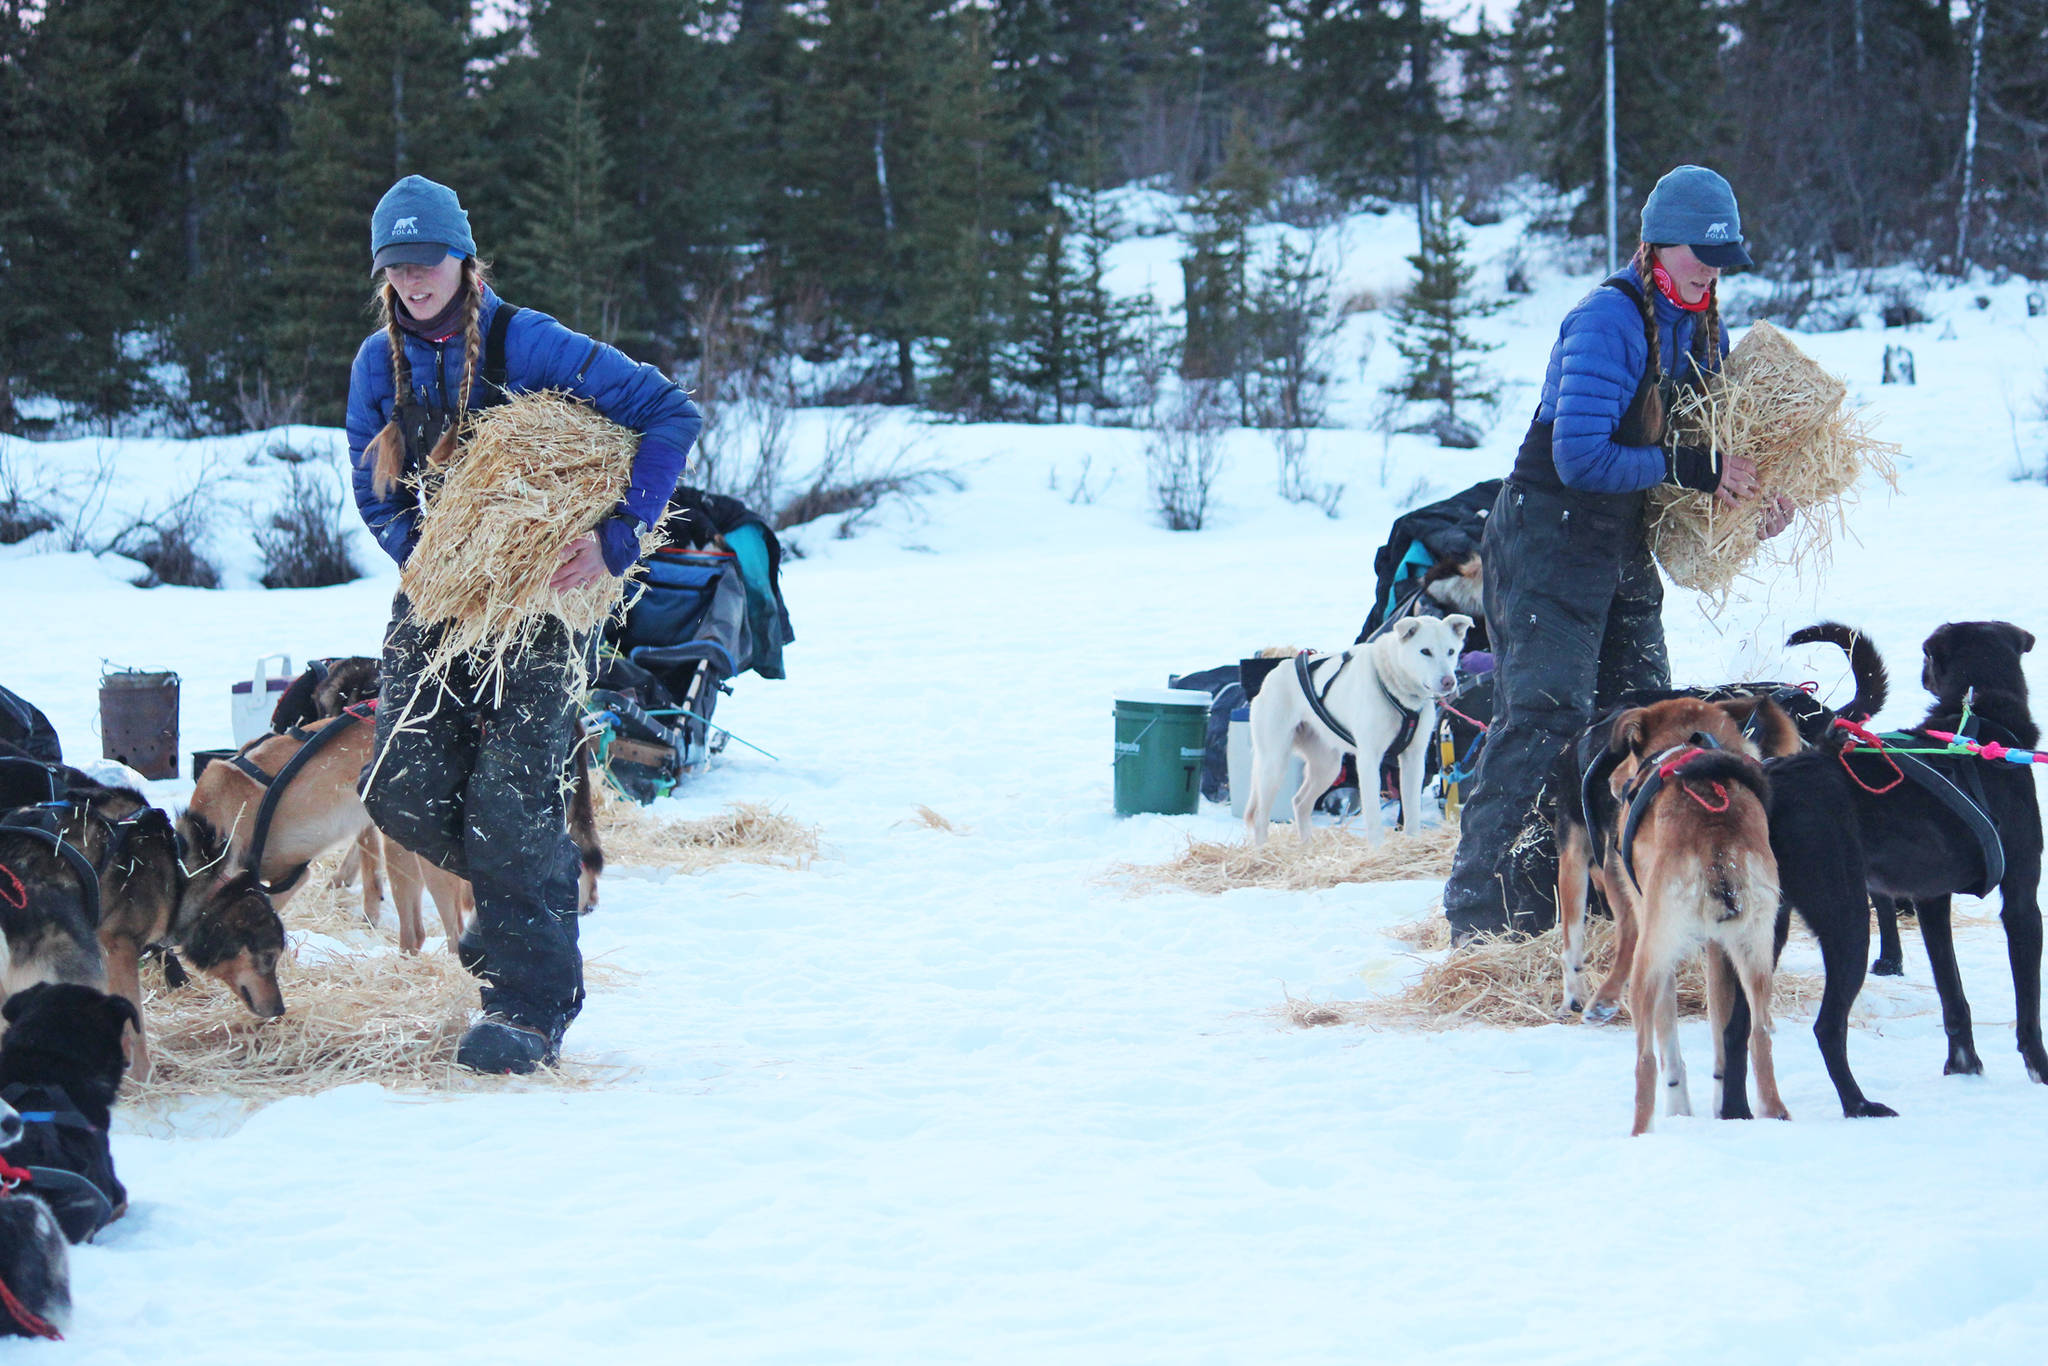 Kristy and Anna Berington lay out hay for their respective dog teams at the first checkpoint of this year’s Tustumena 200 Sled Dog Race on Saturday, Jan. 26, 2019 at McNeil Canyon Elementary School near Homer, Alaska. (Photo by Megan Pacer/Homer News)